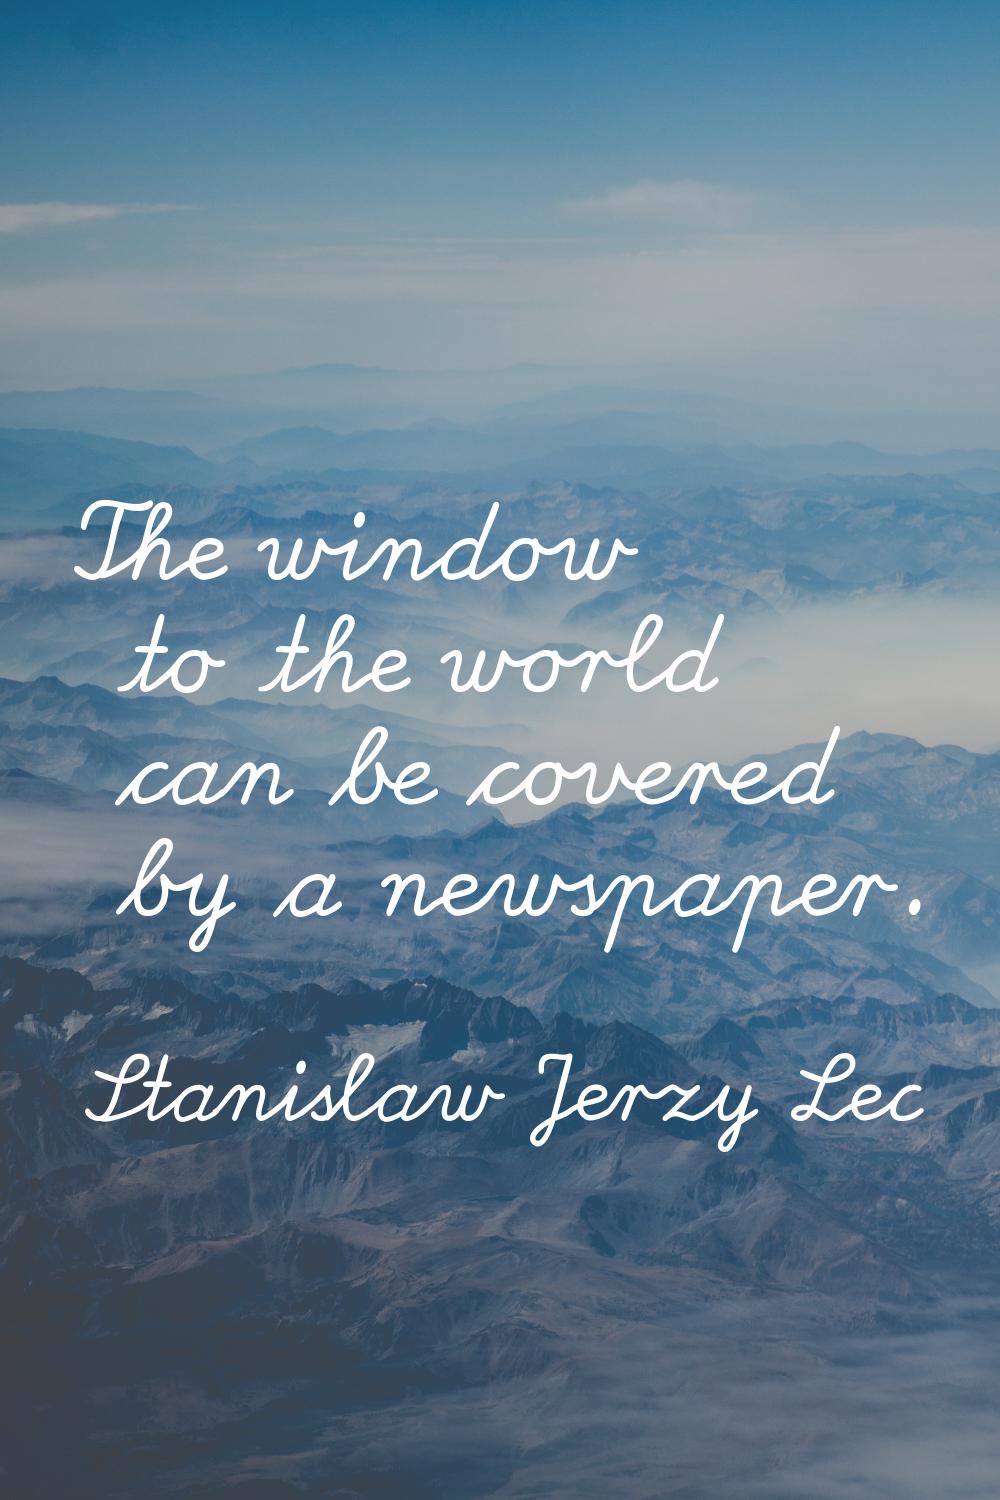 The window to the world can be covered by a newspaper.